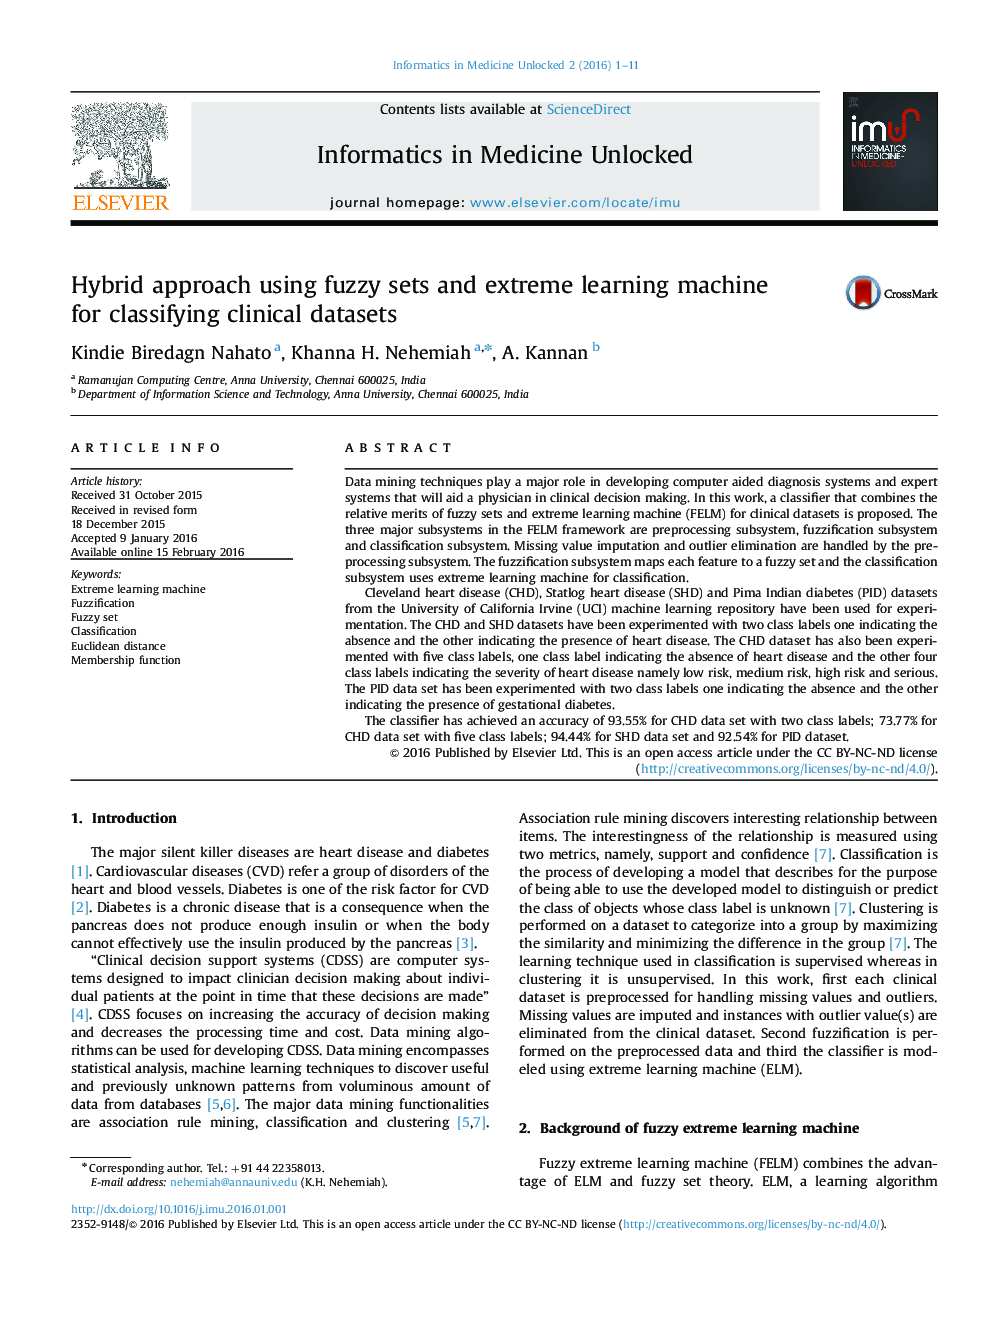 Hybrid approach using fuzzy sets and extreme learning machine for classifying clinical datasets